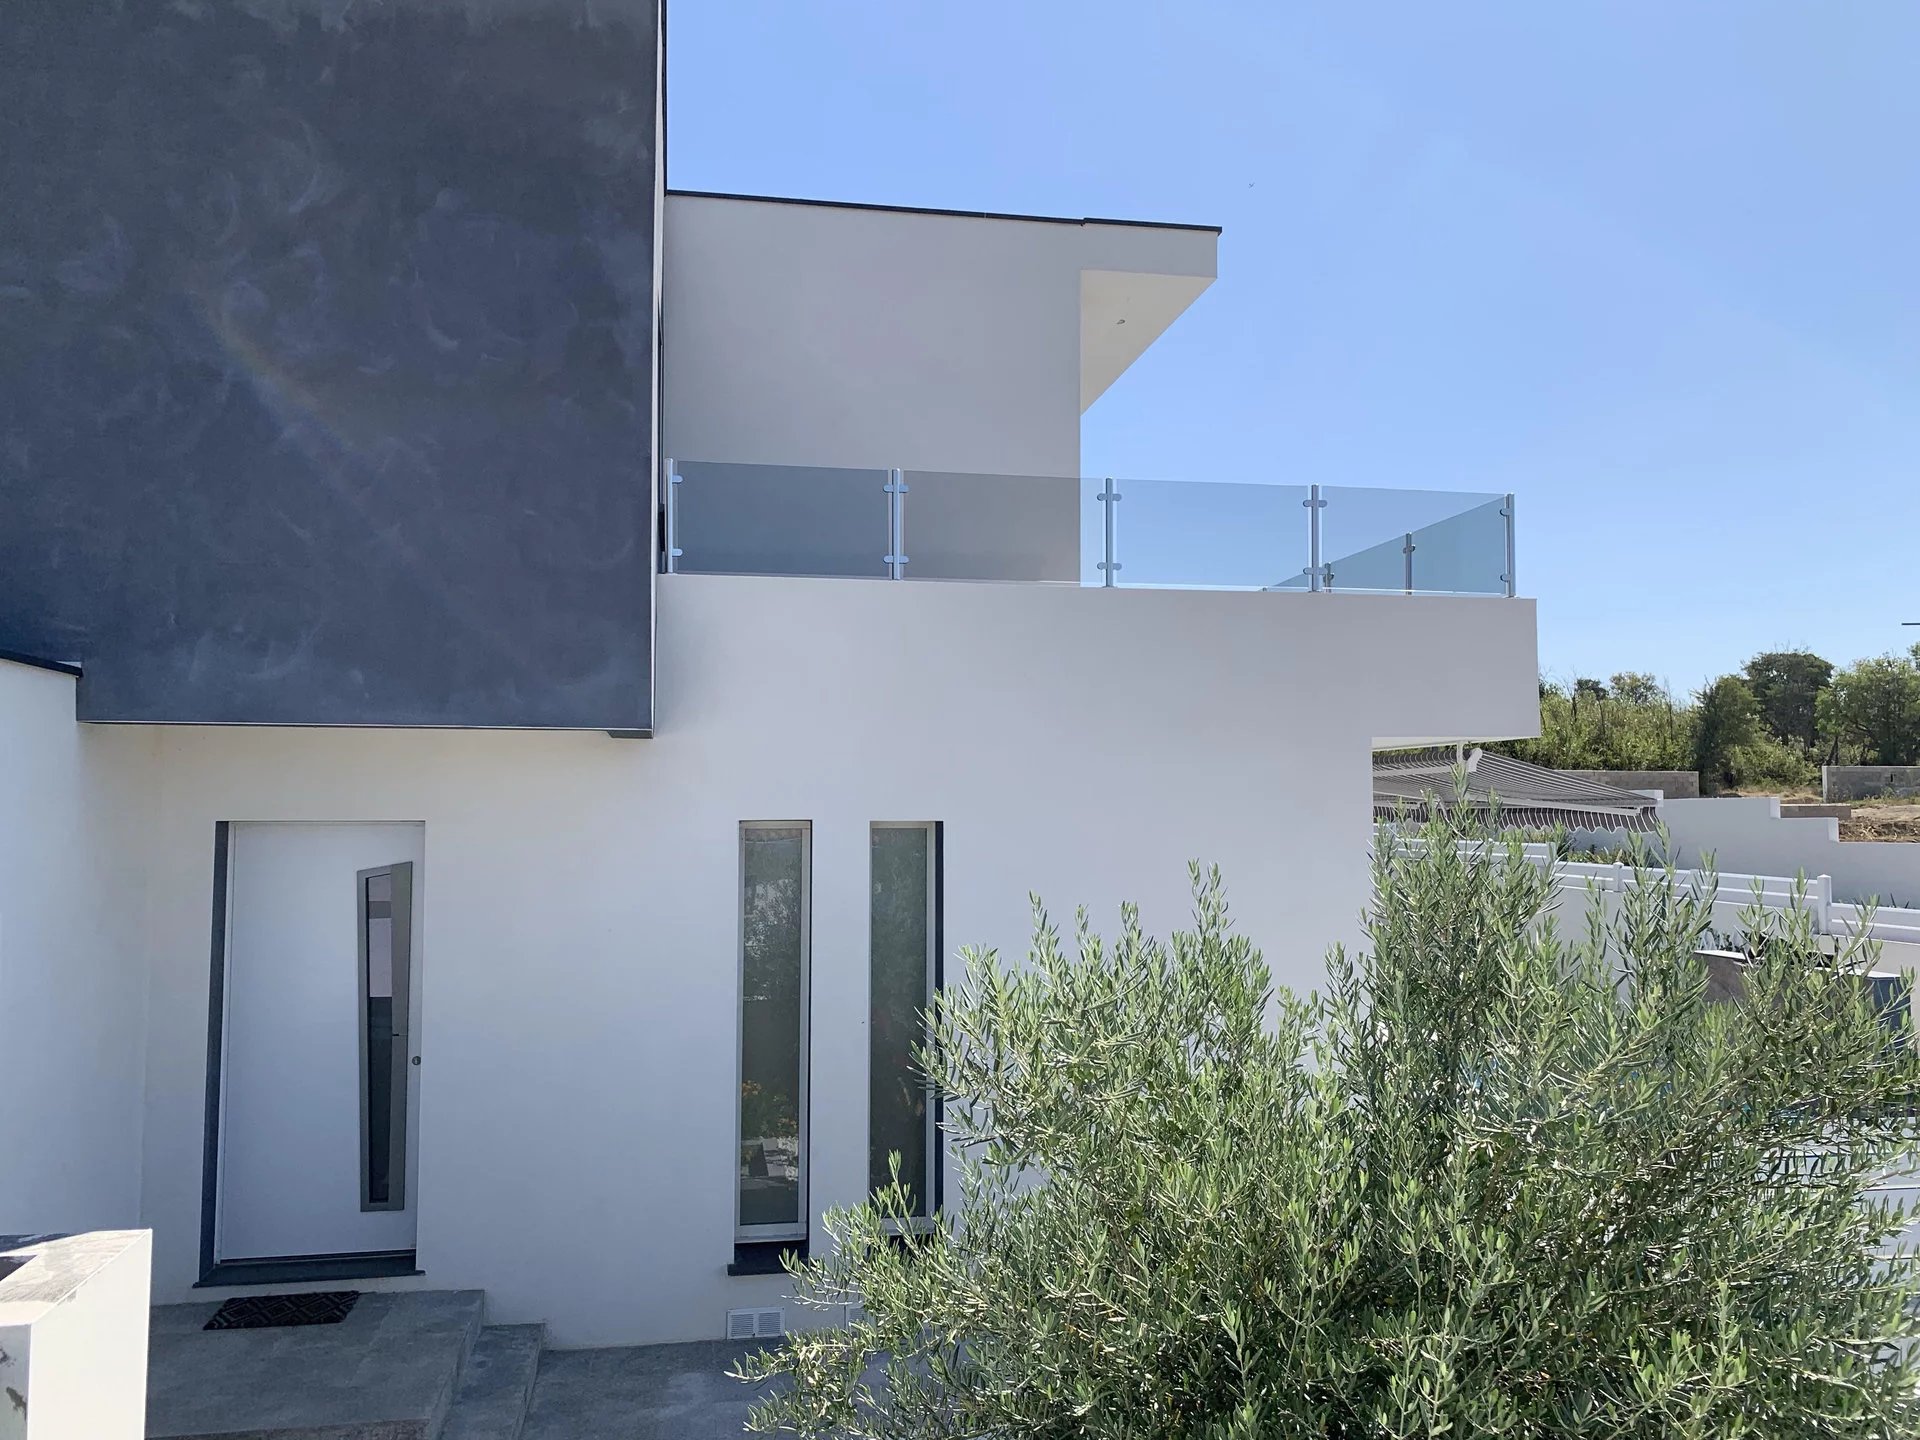 Béziers, 200sqm modern house with pool for renting